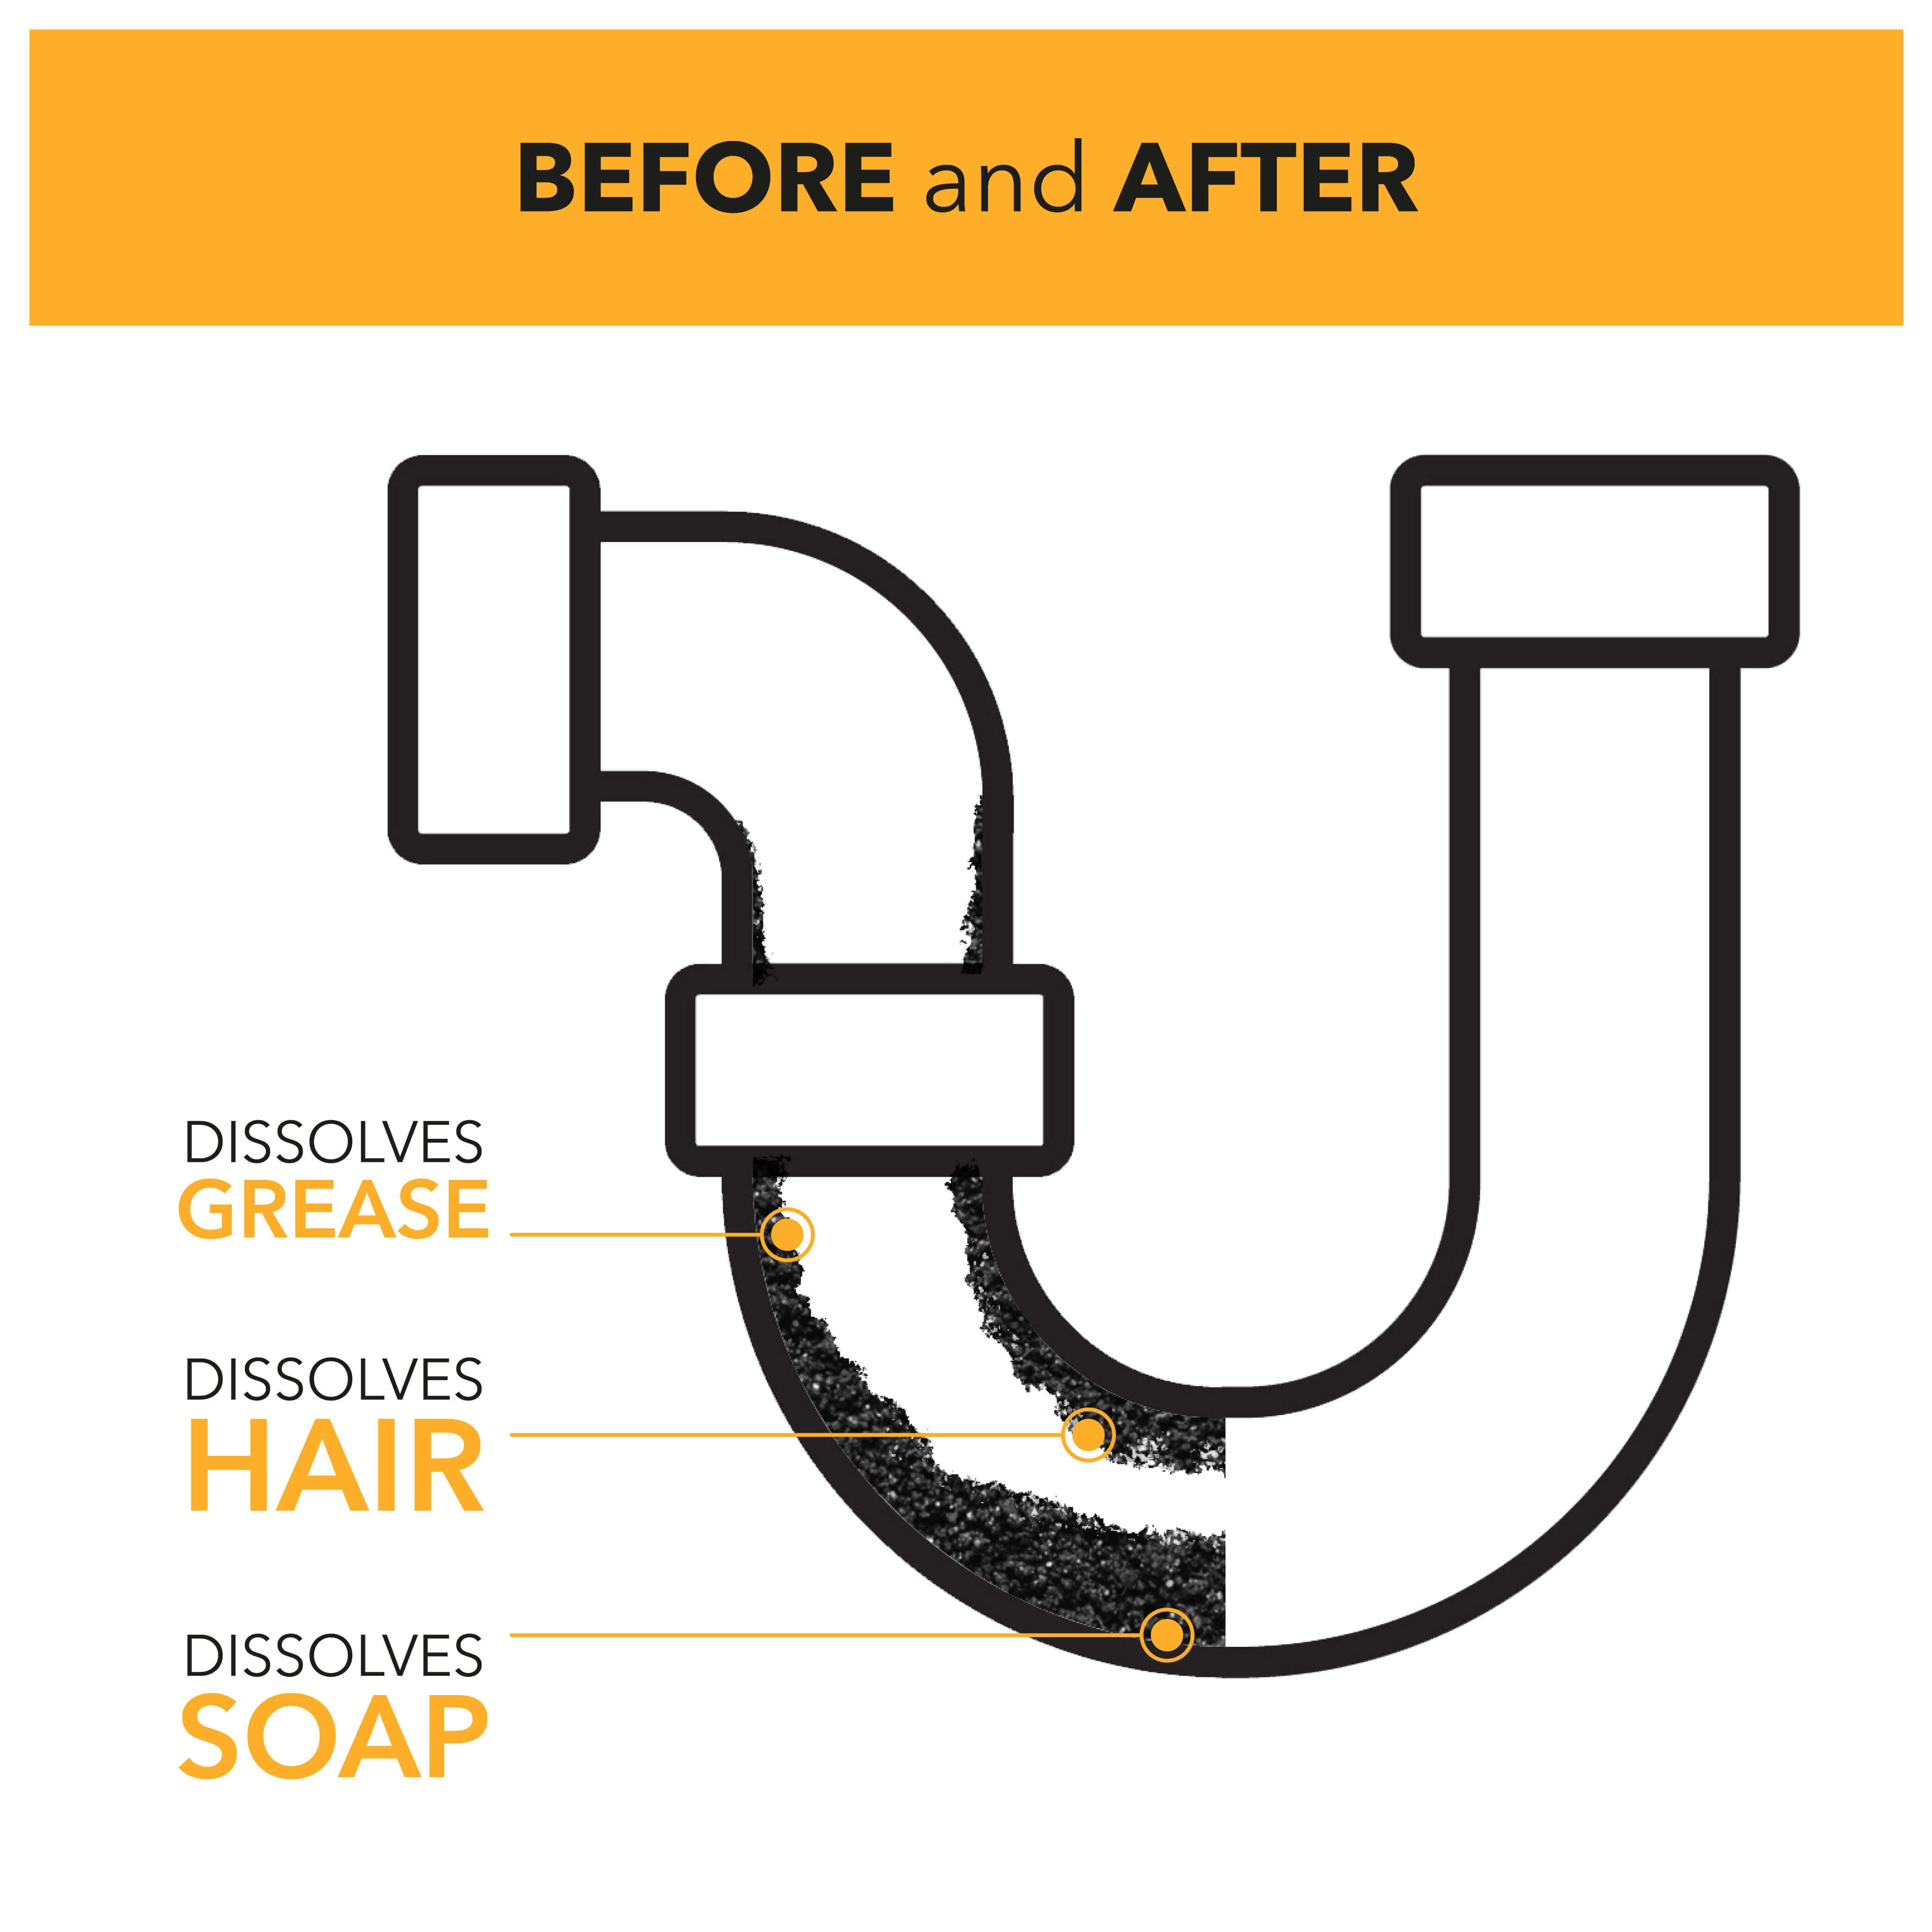 Before and after using JCB Sink & Drain Unblocker, dissolves grease, hair and soap